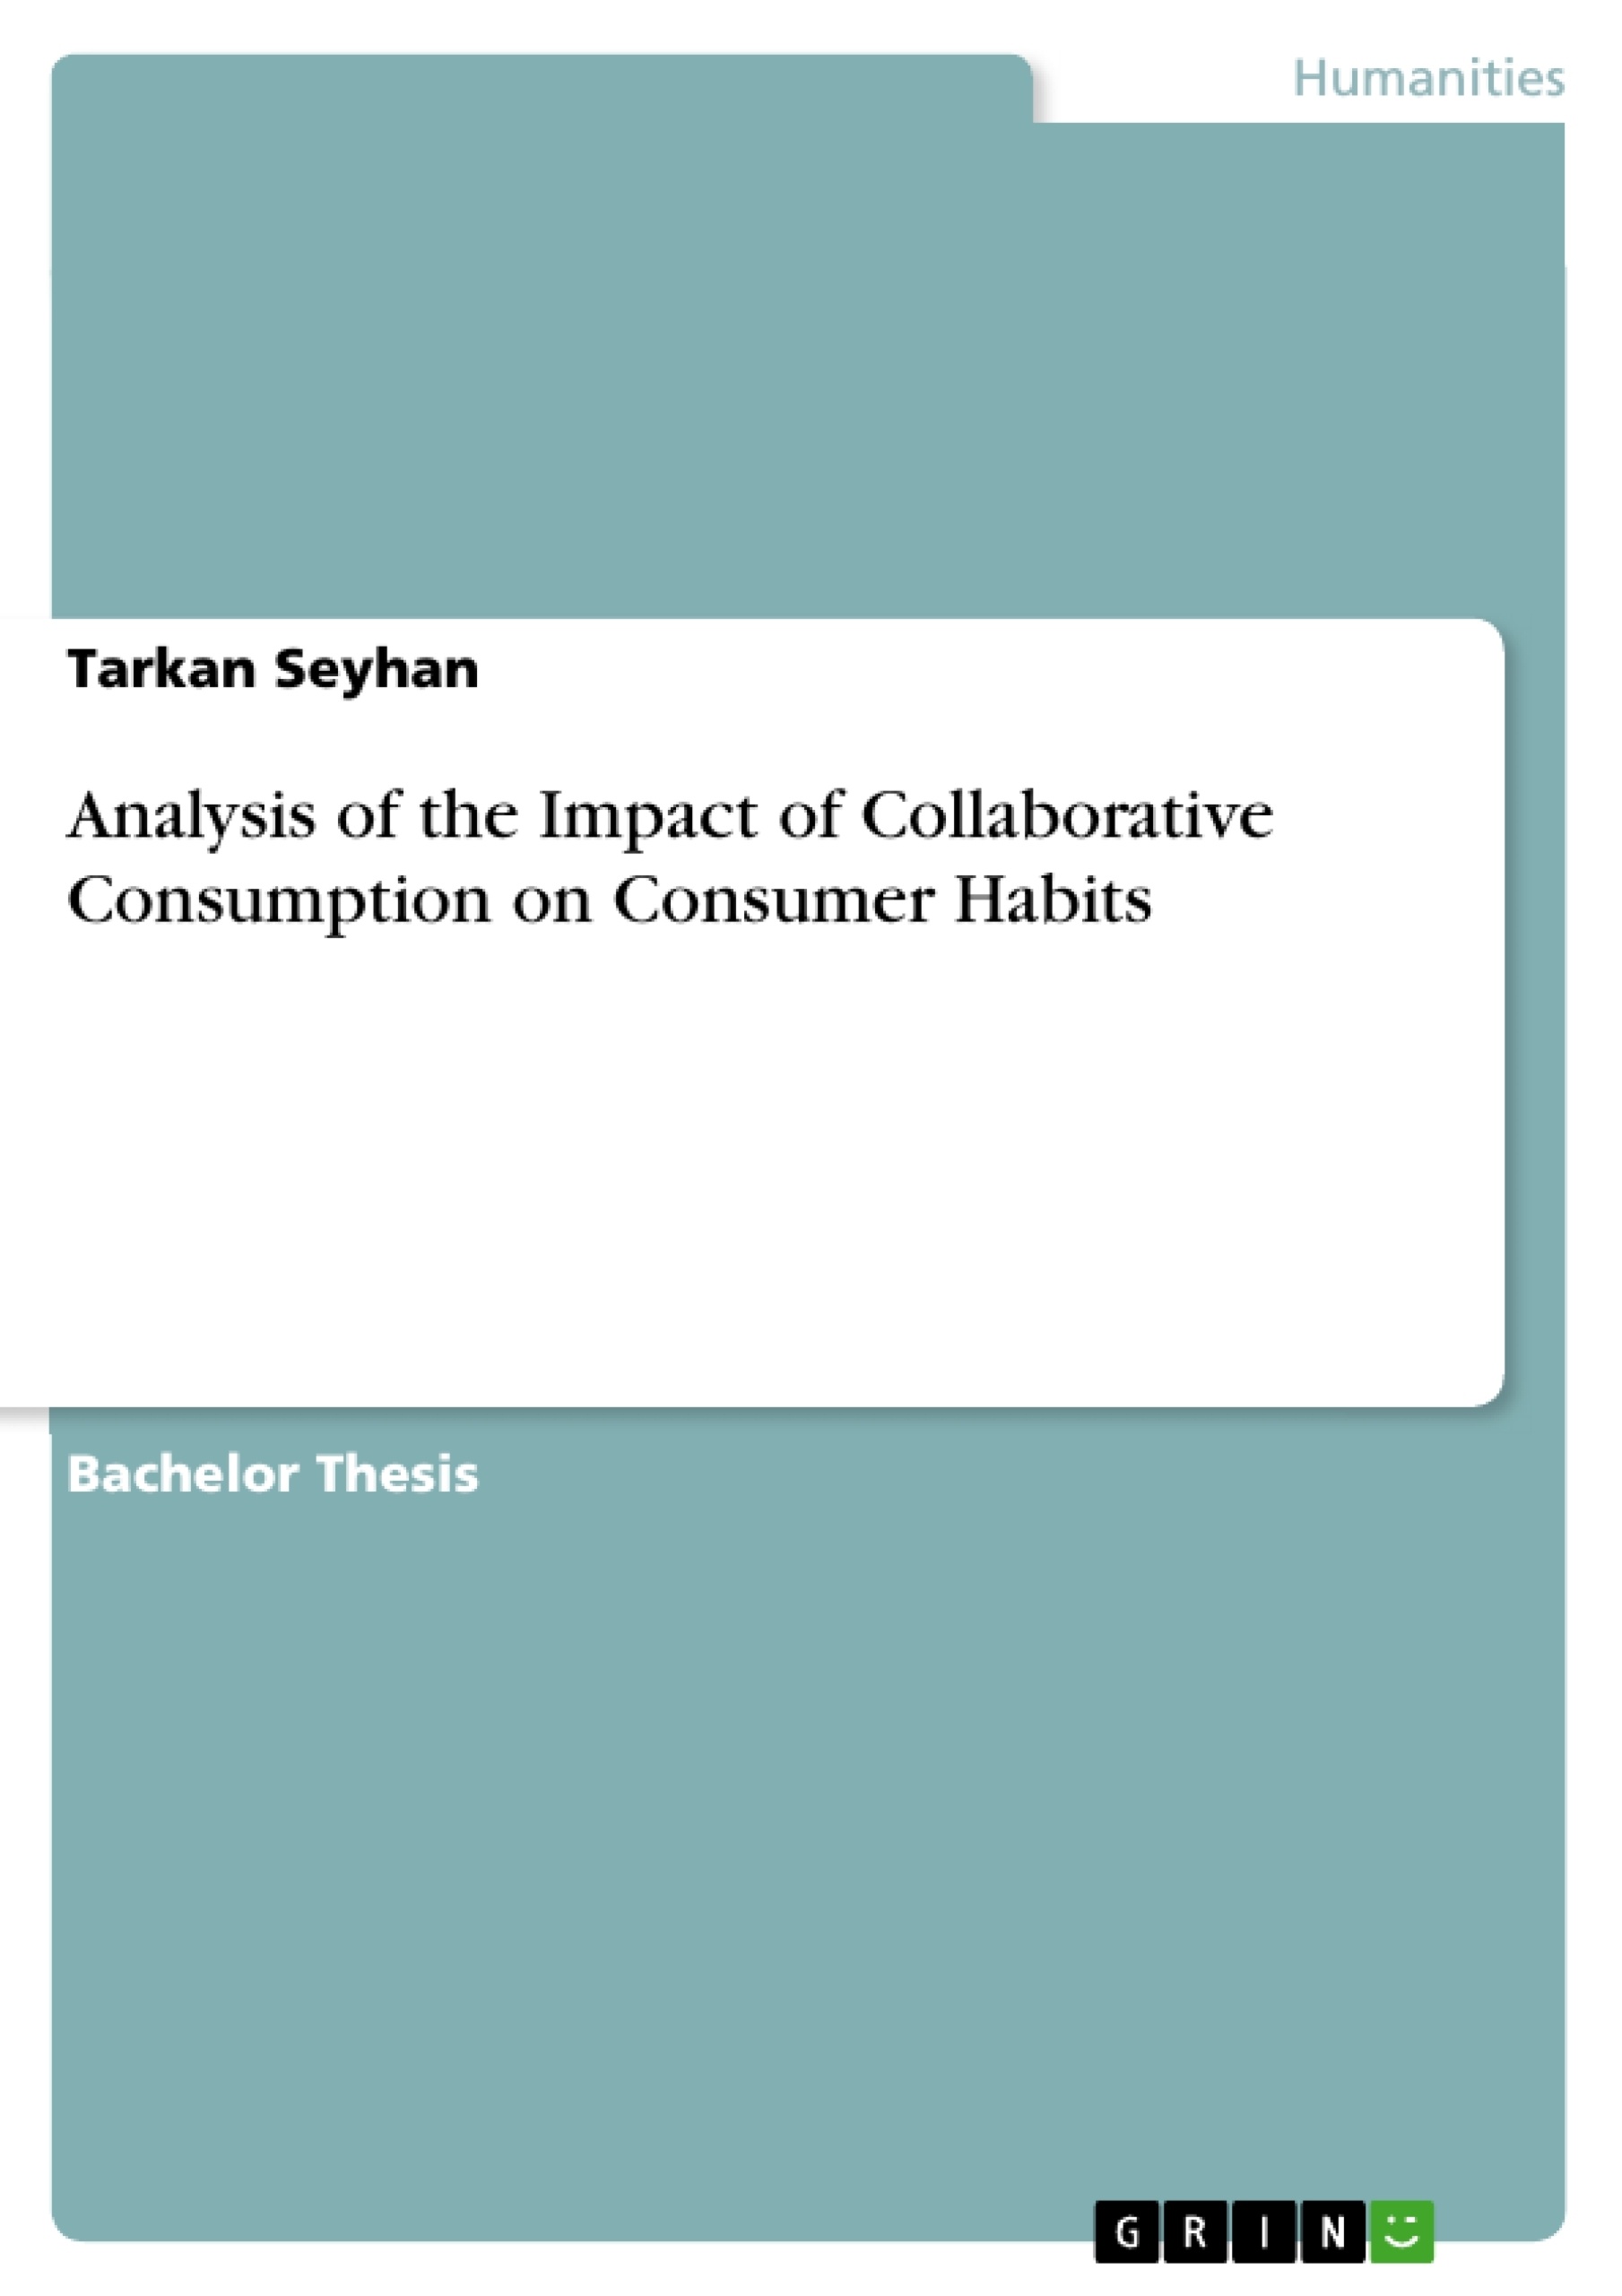 Title: Analysis of the Impact of Collaborative Consumption on Consumer Habits